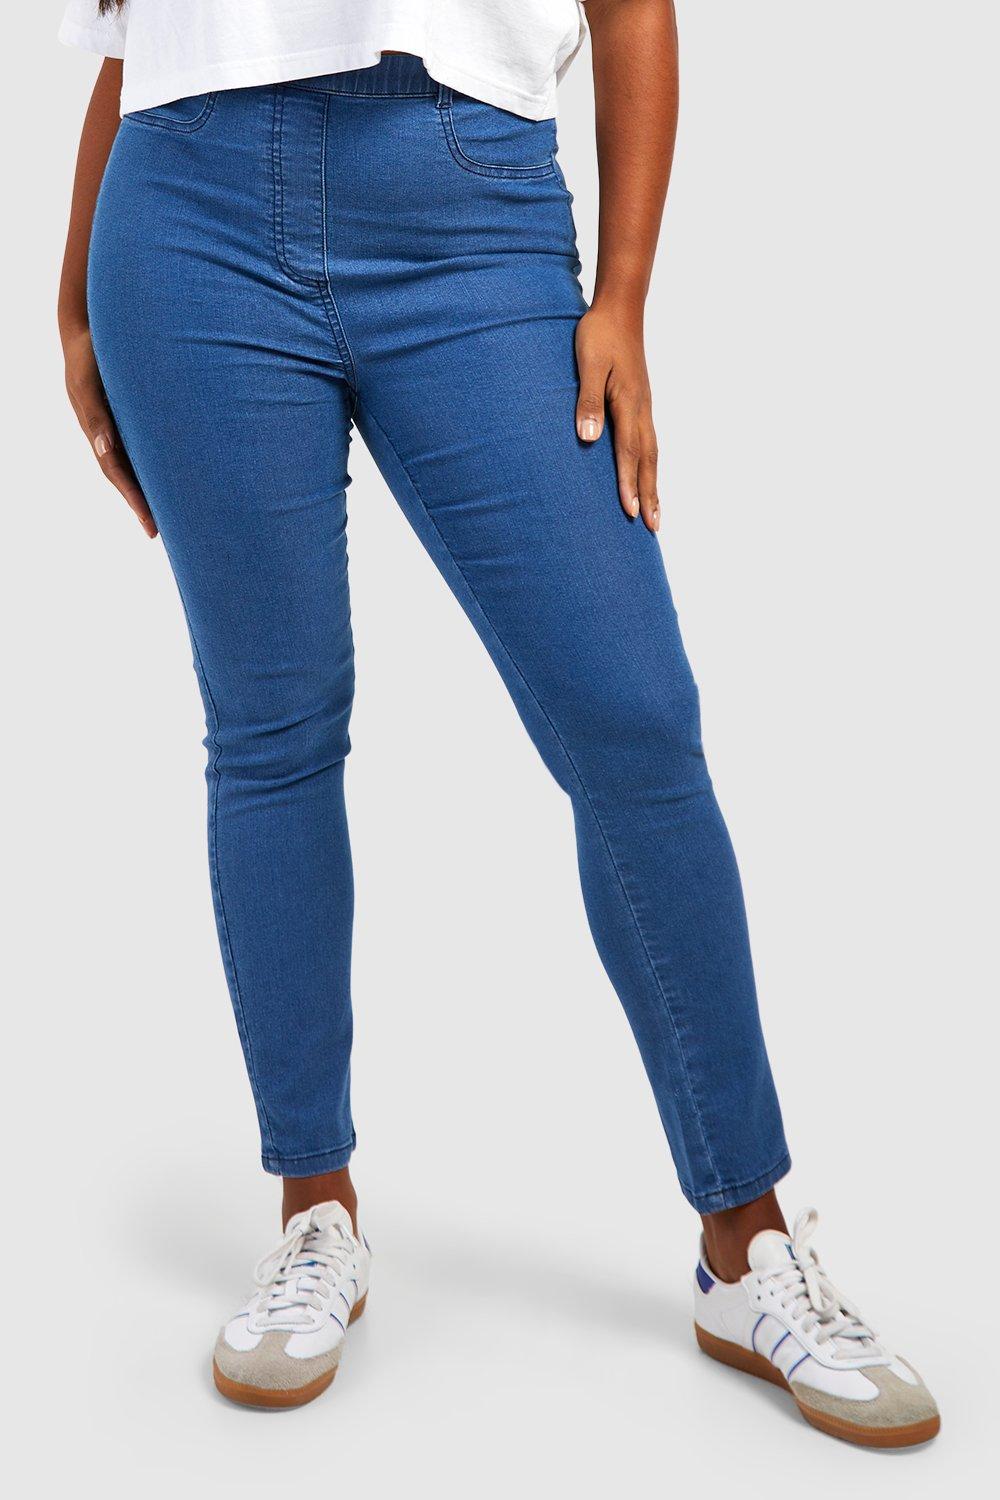 Size 28 Tall Jeggings